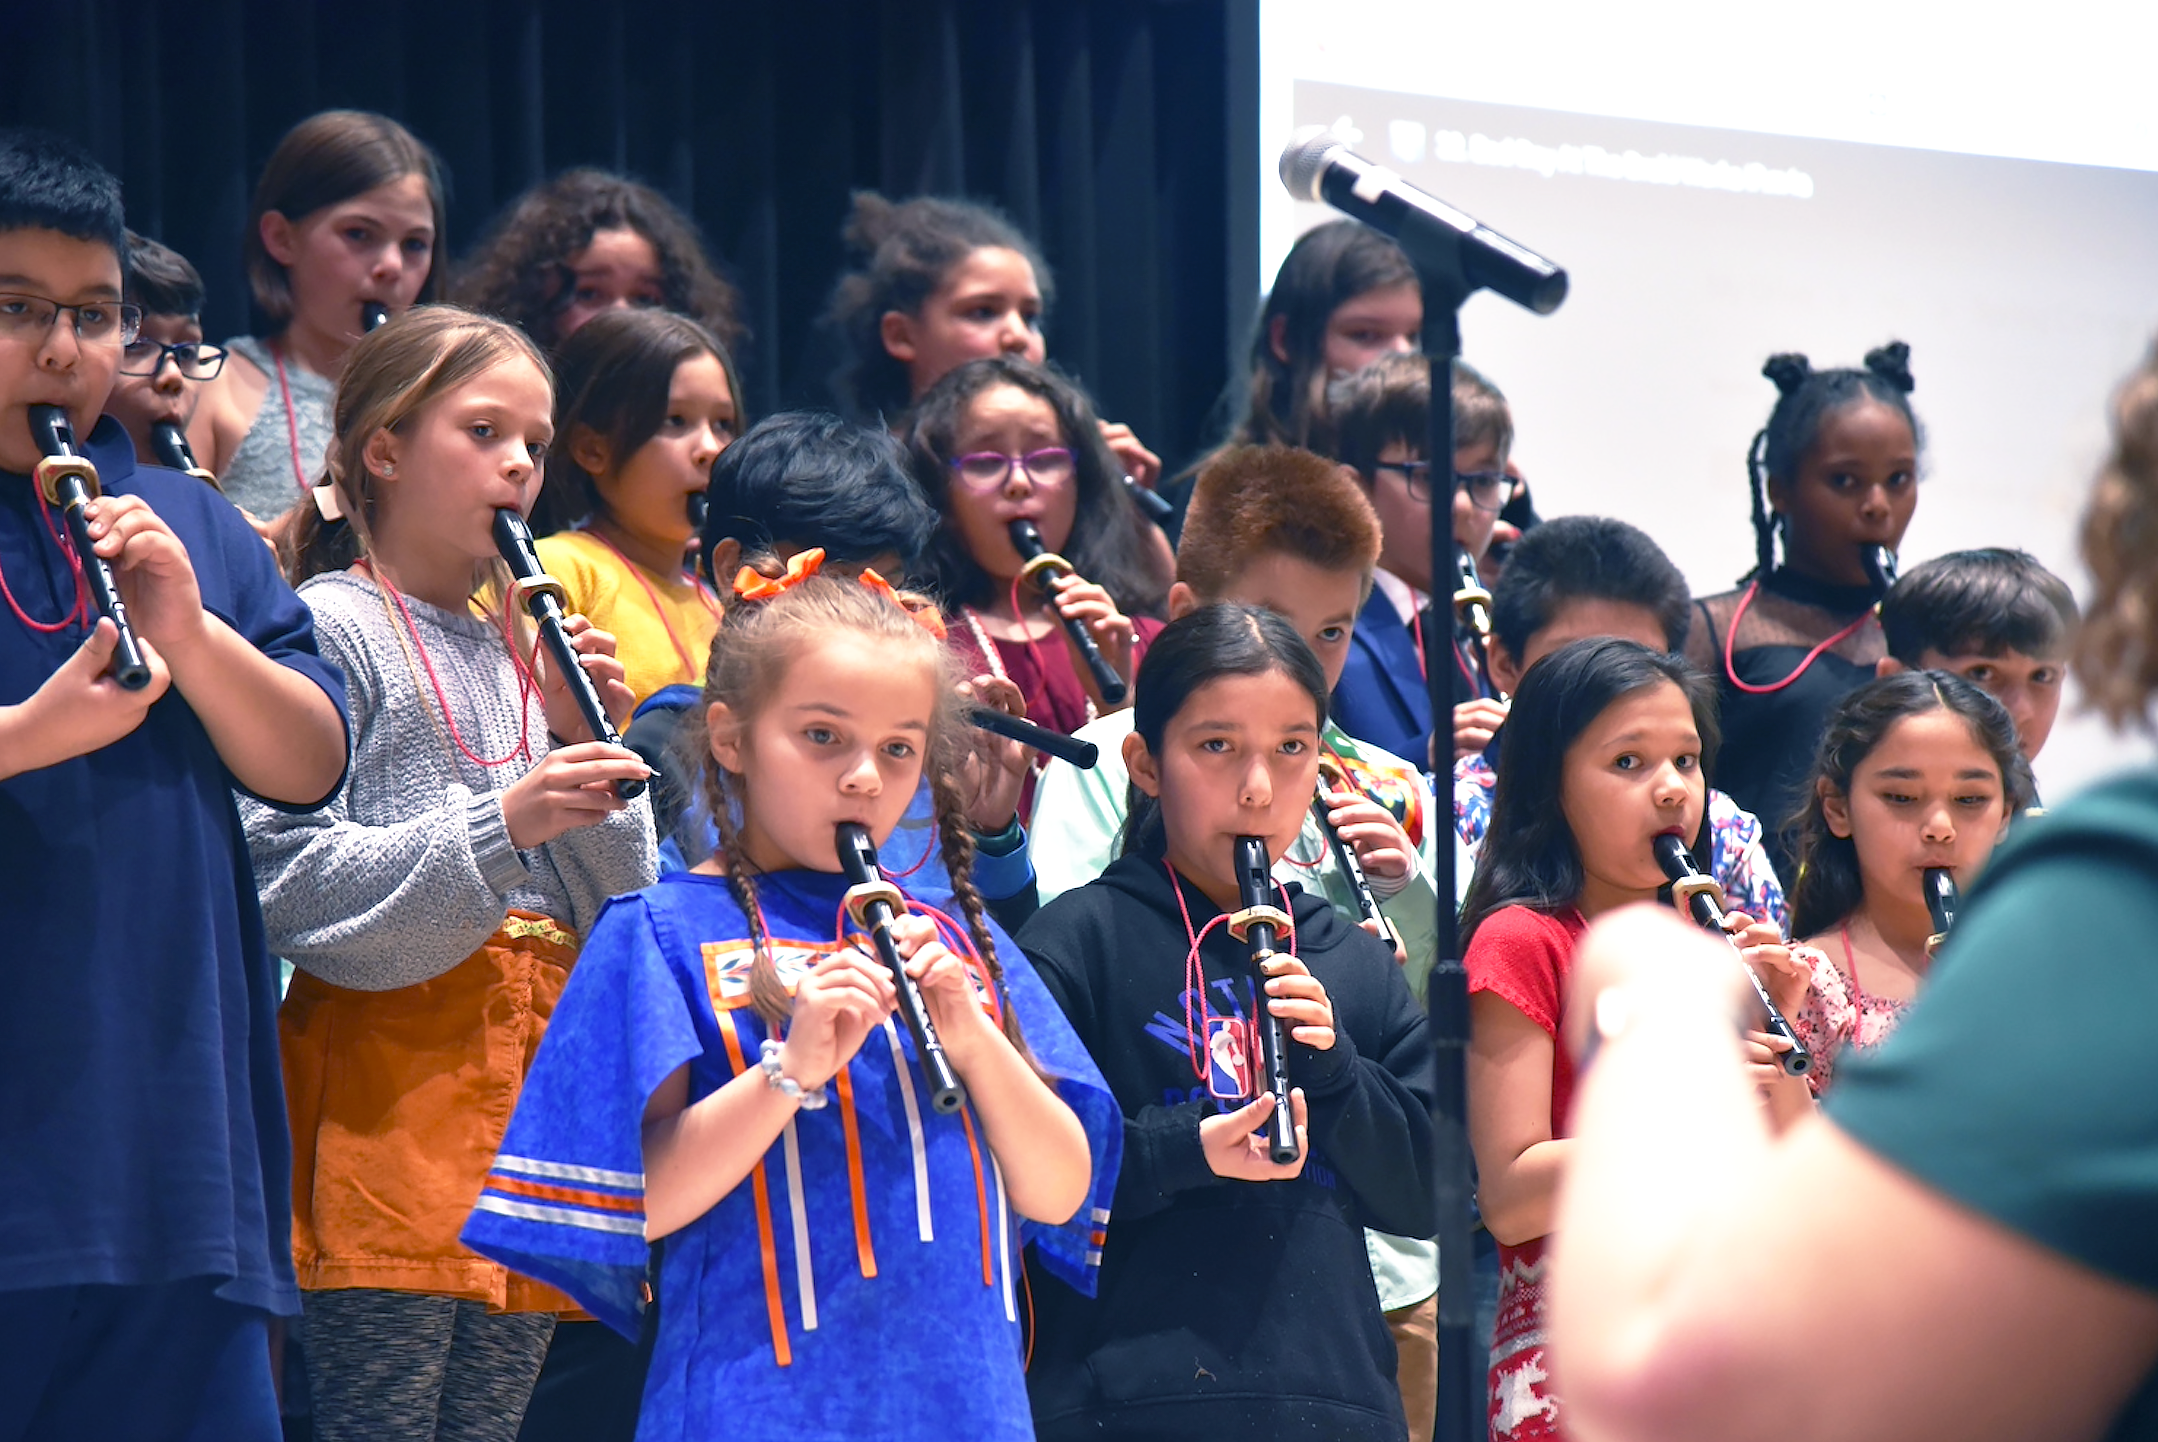 Group of students playing recorders at a concert; teacher is on the right, conducting them.